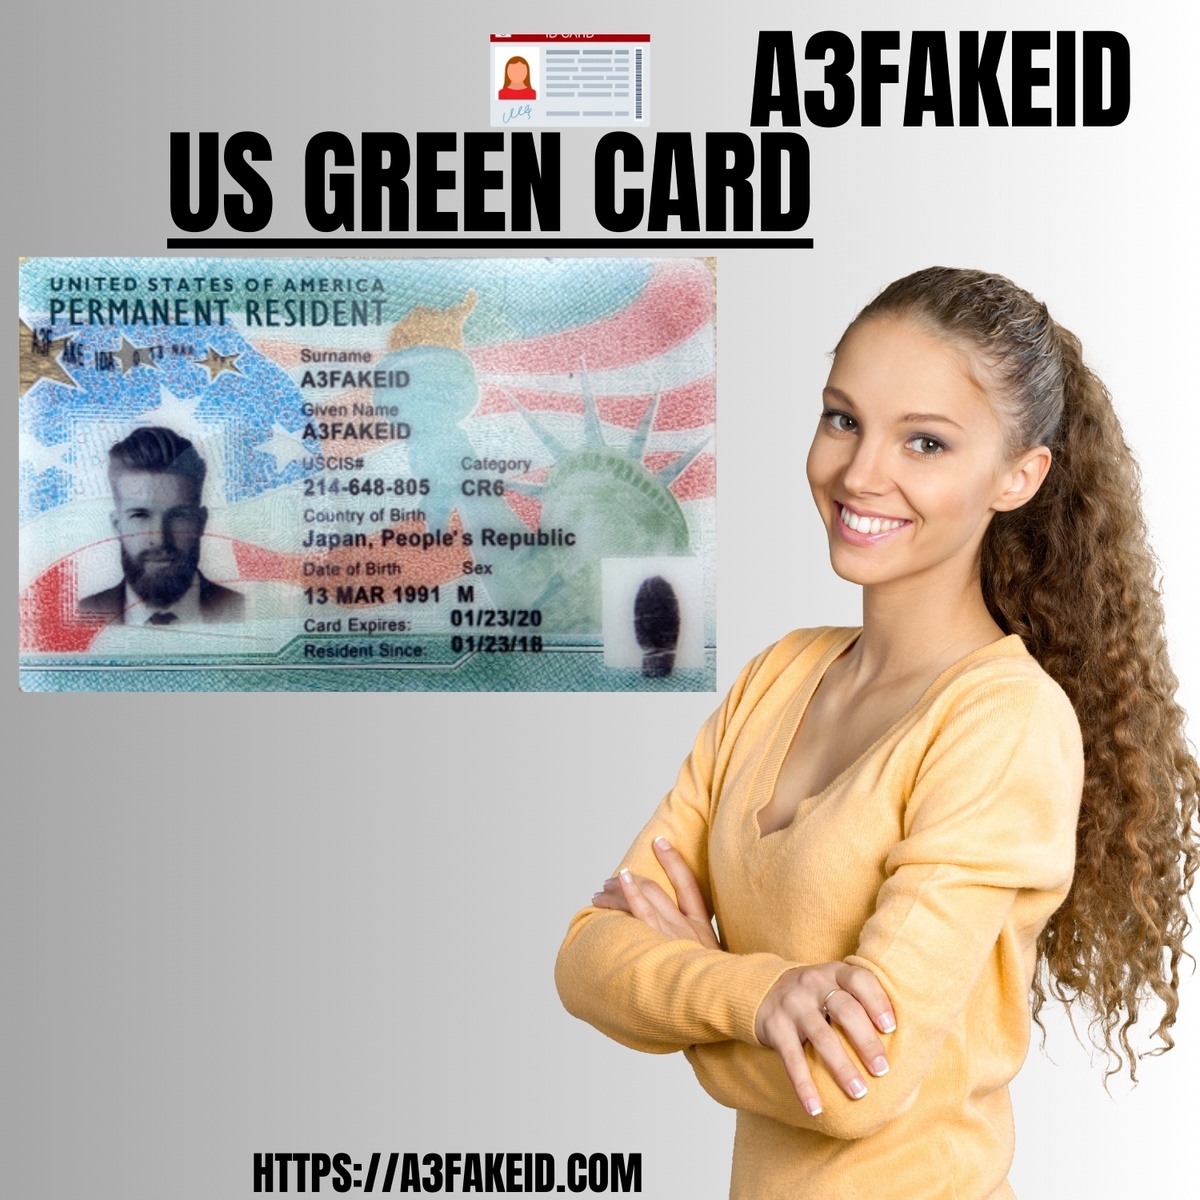 Unlock Your American Dream: Your Path to a US Green Card Starts Here